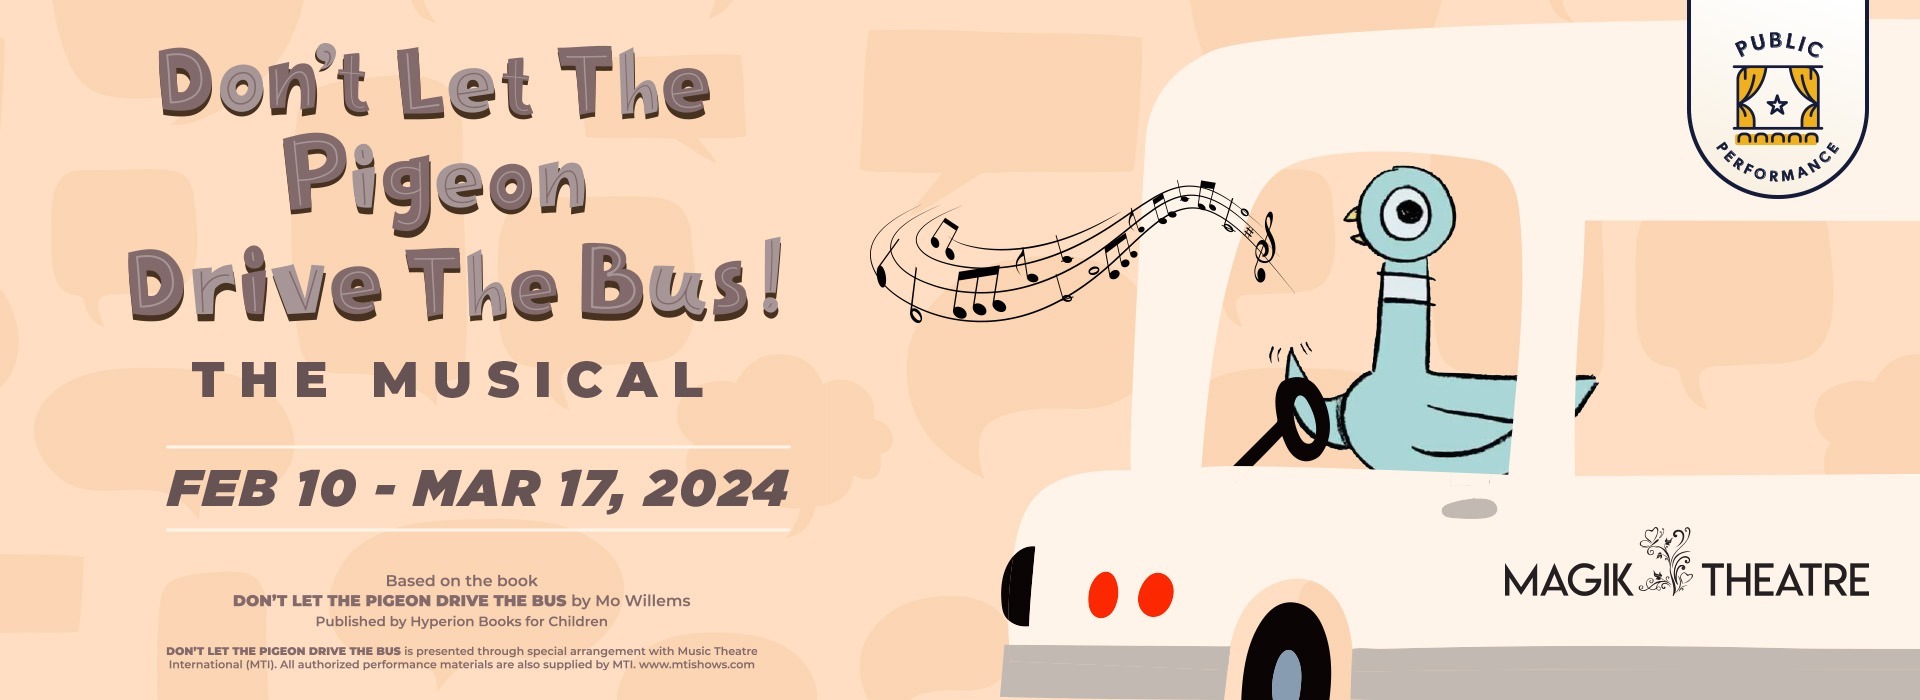 Don't Let the Pigeon Drive the Bus! by Magik Theatre